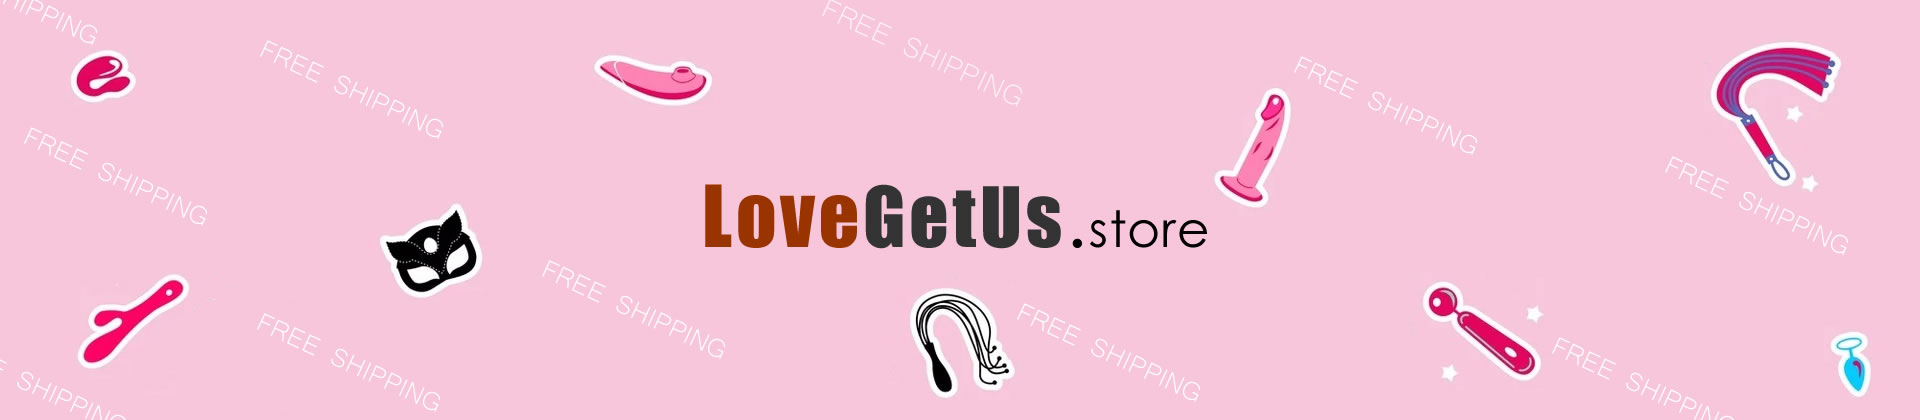 FREE SHIPPING sex toys at lovegetus store